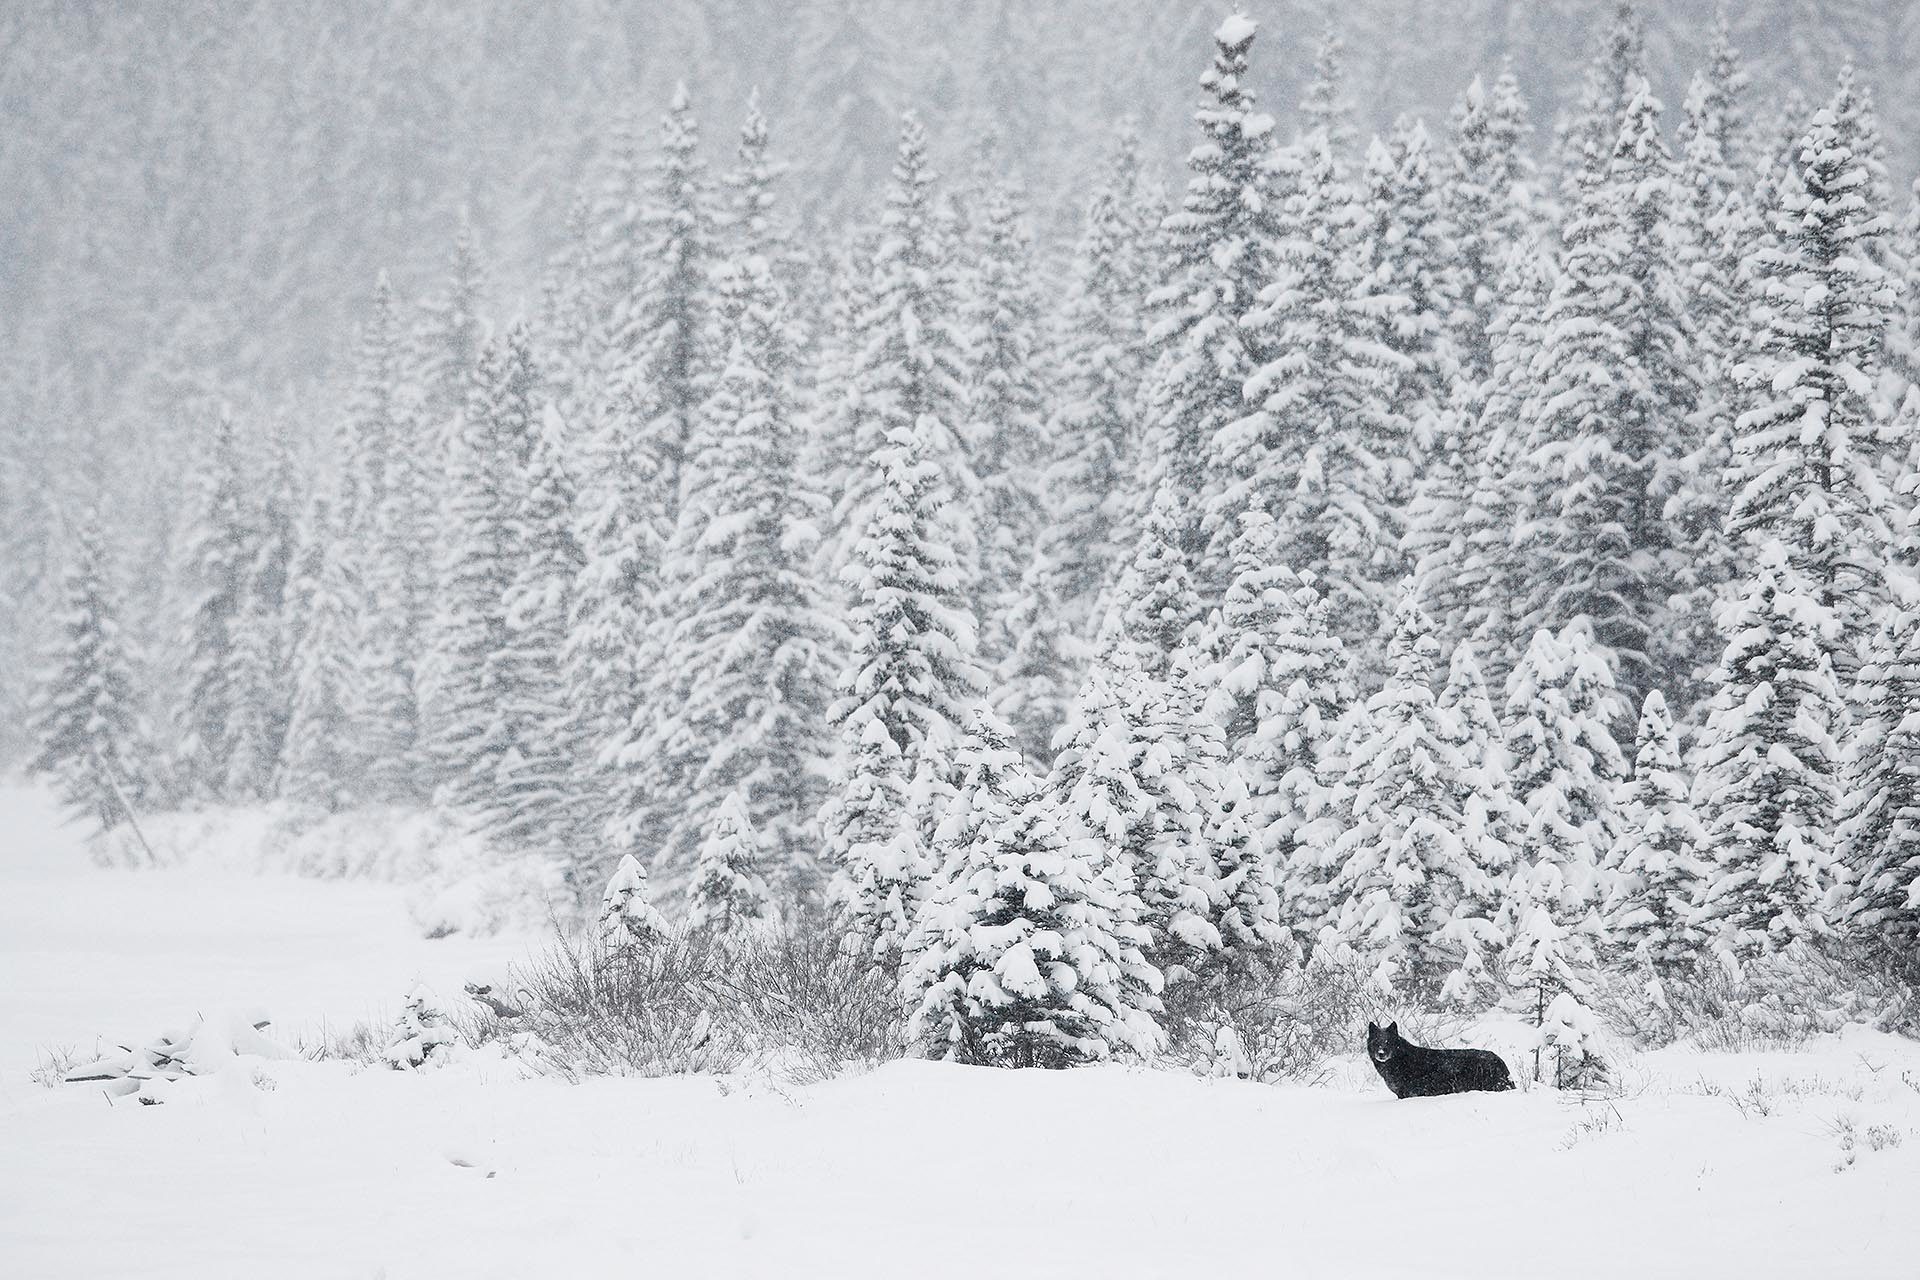 Wild black wolf in a winter snowstorm in the Canadian north.